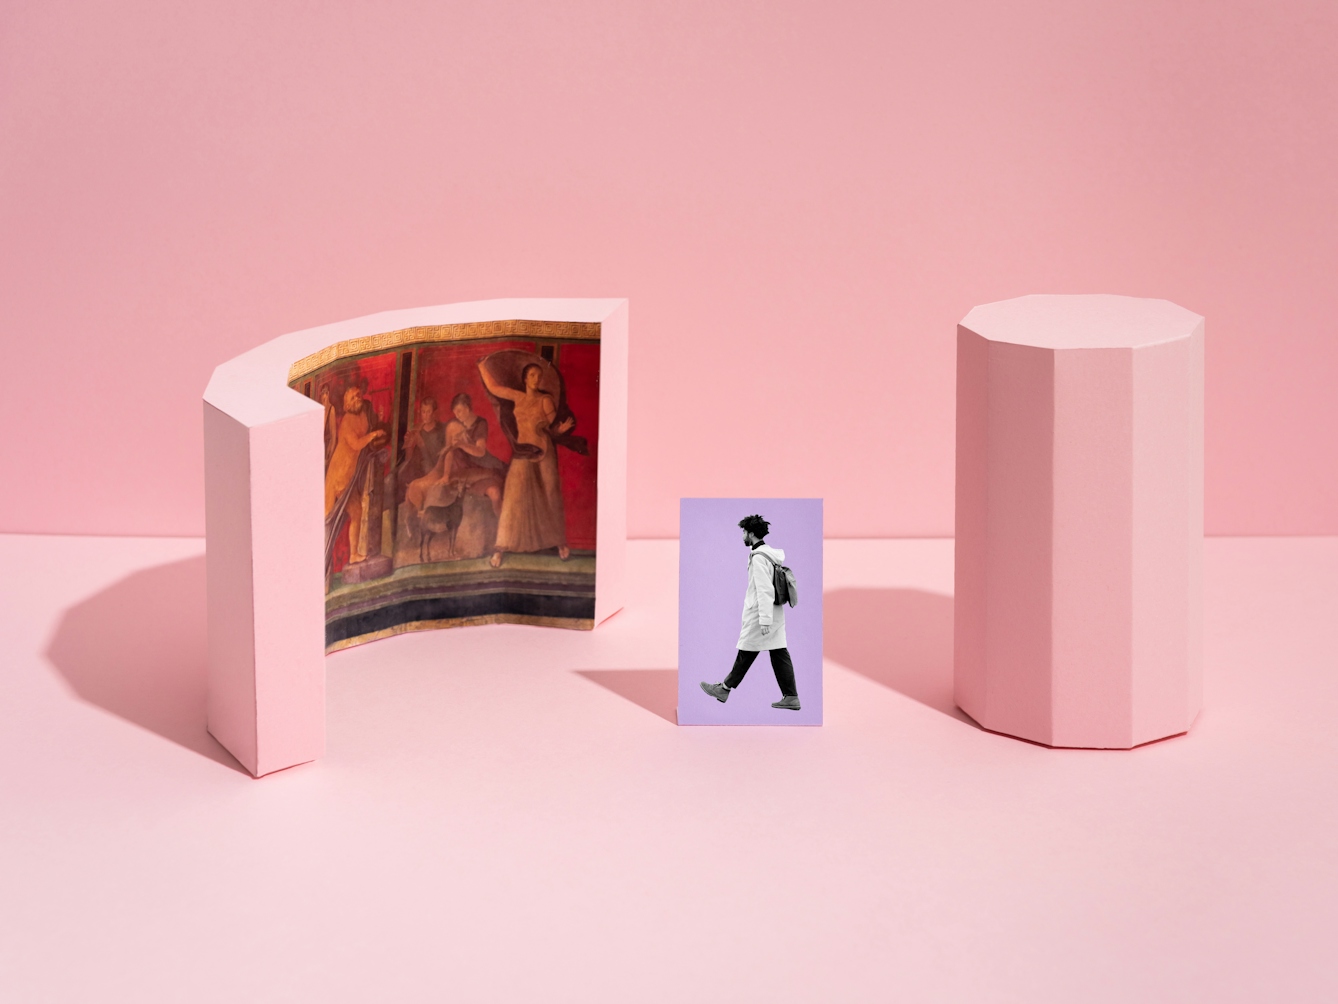 Photograph of a set built scene. The scene is made out of a light pink horizontal surface against a light pink vertical background with a thin horizon line. On the horizontal surface are two pink three dimensional shapes. The shape on the right is a tall thin shape with ten vertical sides. The shape on the left is semicircular with a Roman fresco visible on the inside curve. In the centre of the image is a rectangular flat purple card standing upright, on which is the black and white image of a man in full length wearing a backpack walking towards the fresco.